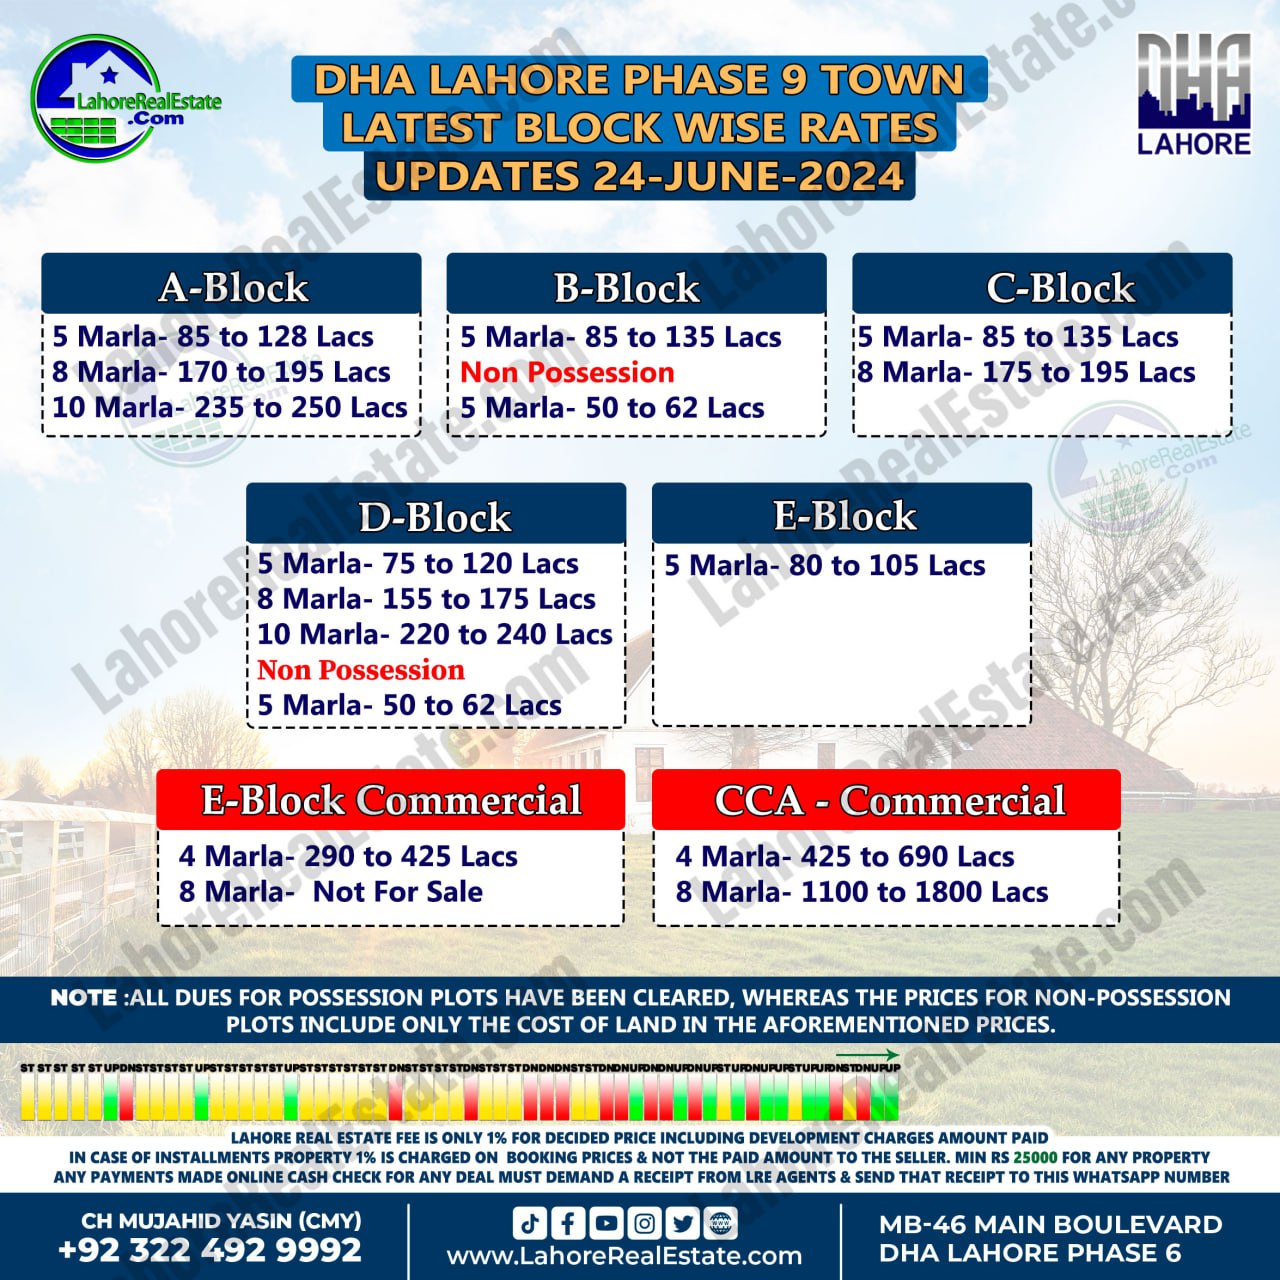 DHA Lahore Phase 9 Town Plot Prices Blockwise Rates June 24, 2024